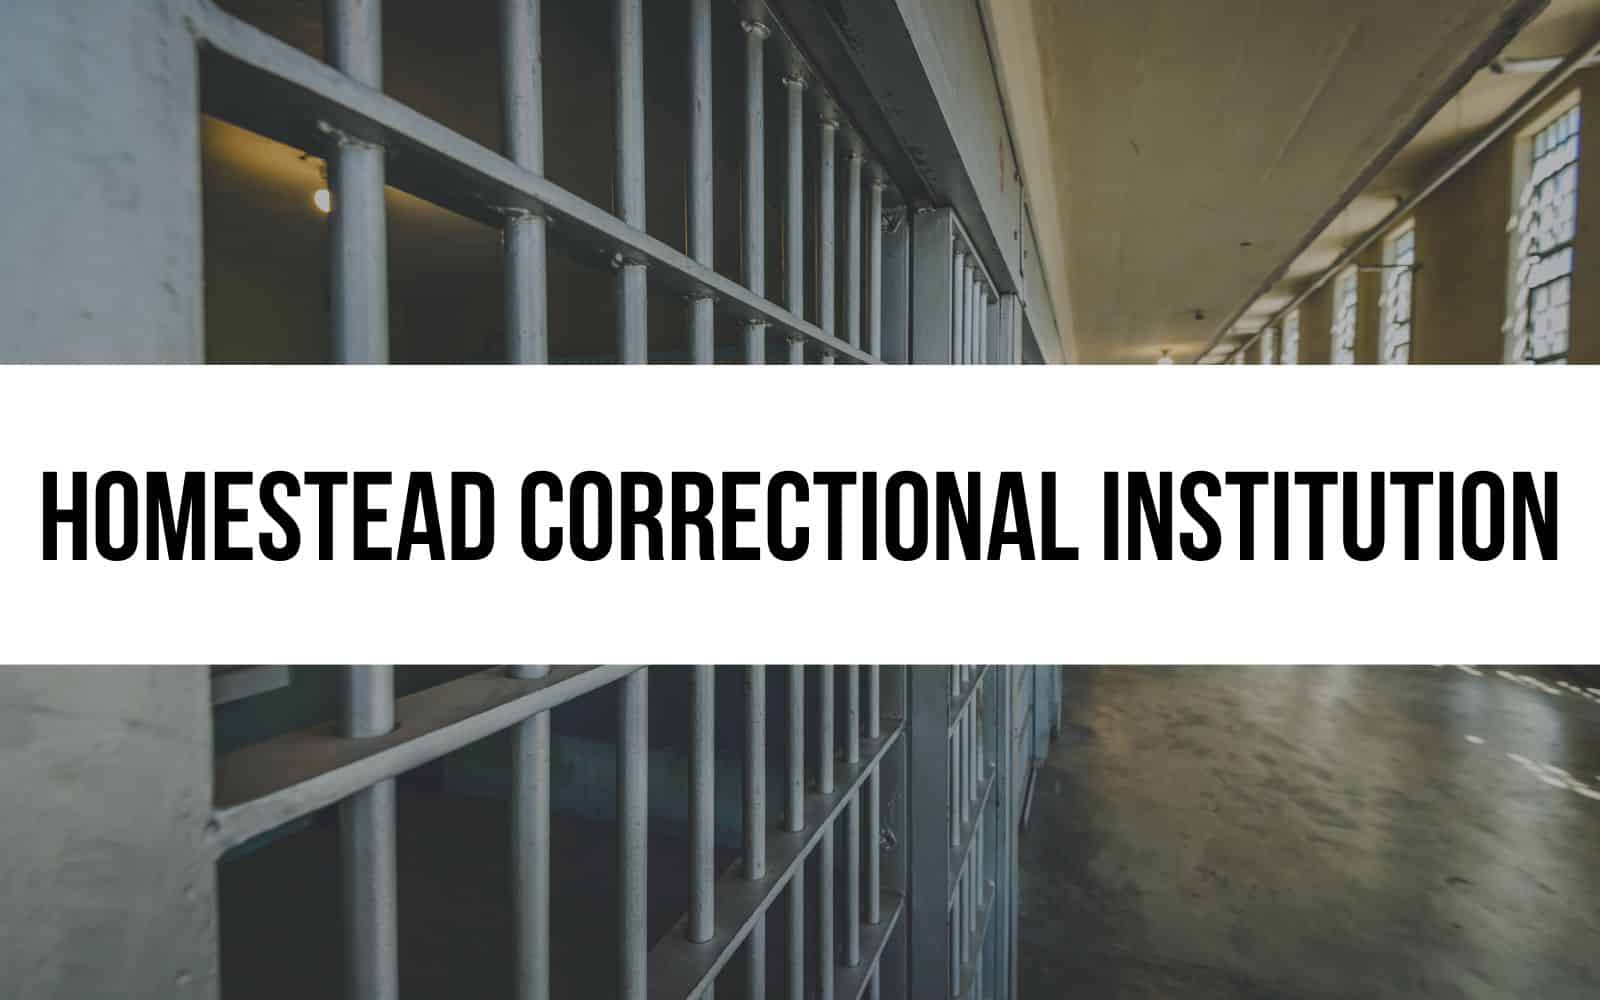 Homestead Correctional Institution